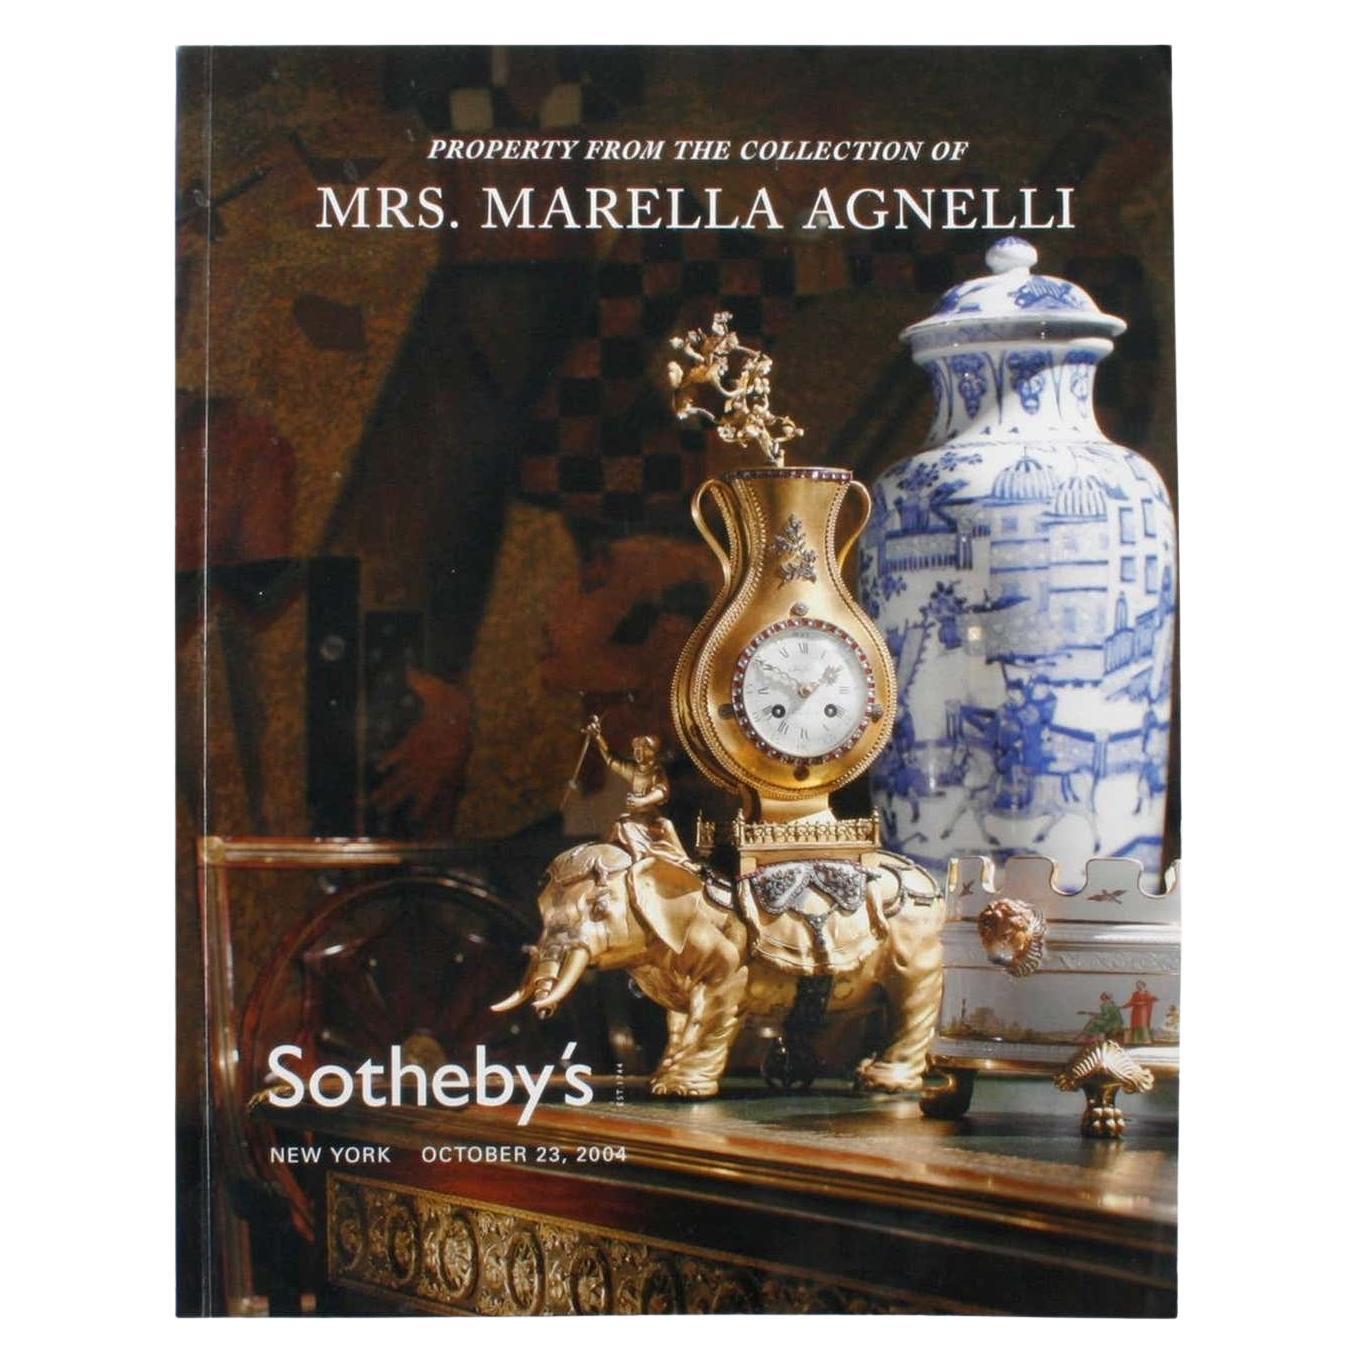 Sotheby's: Property from the Collection of Mrs. Marella Agnelli New York 10/2004